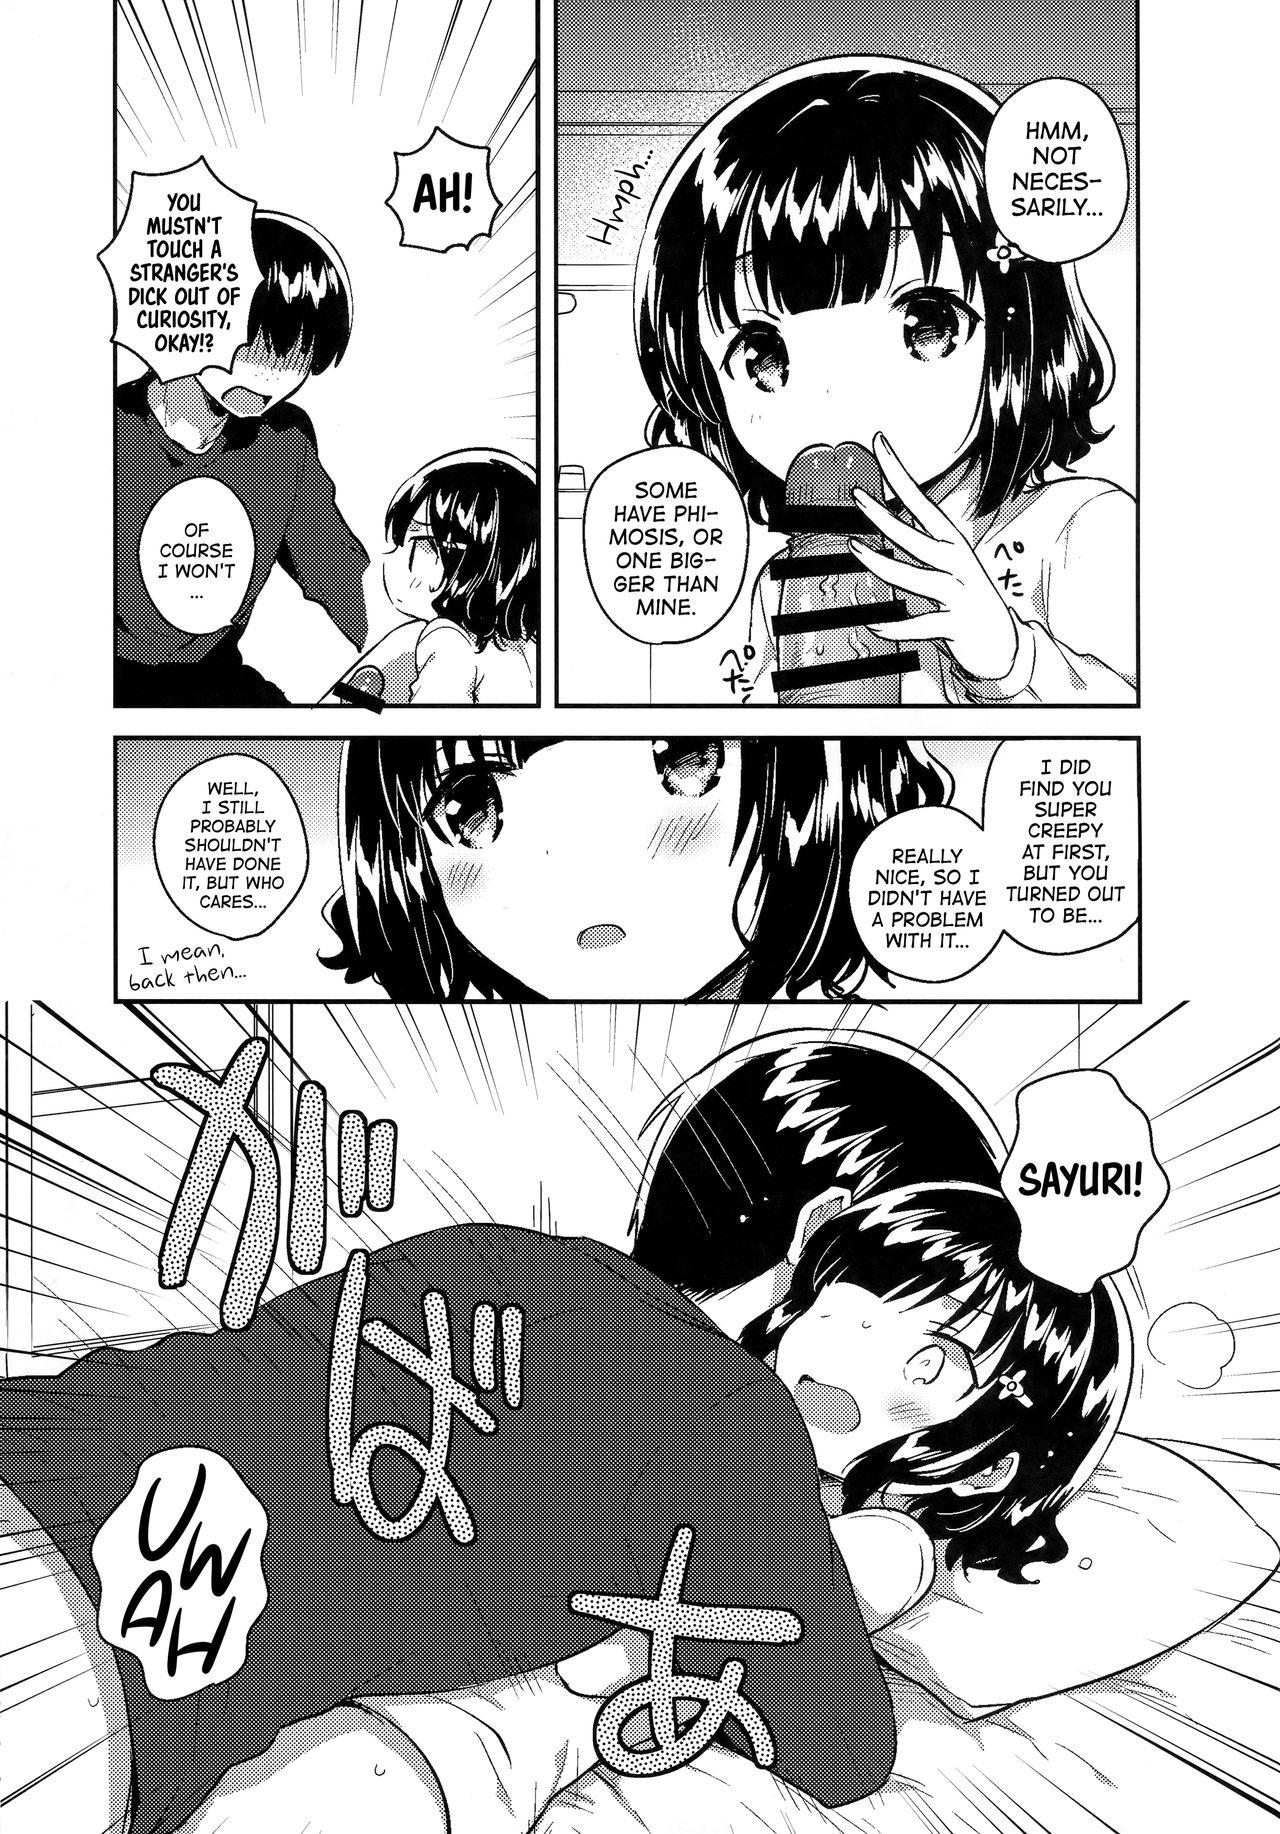 Foursome Love Letter wa Doko ni Itta no ka? | Where did the love letter go? - Original Ball Busting - Page 5